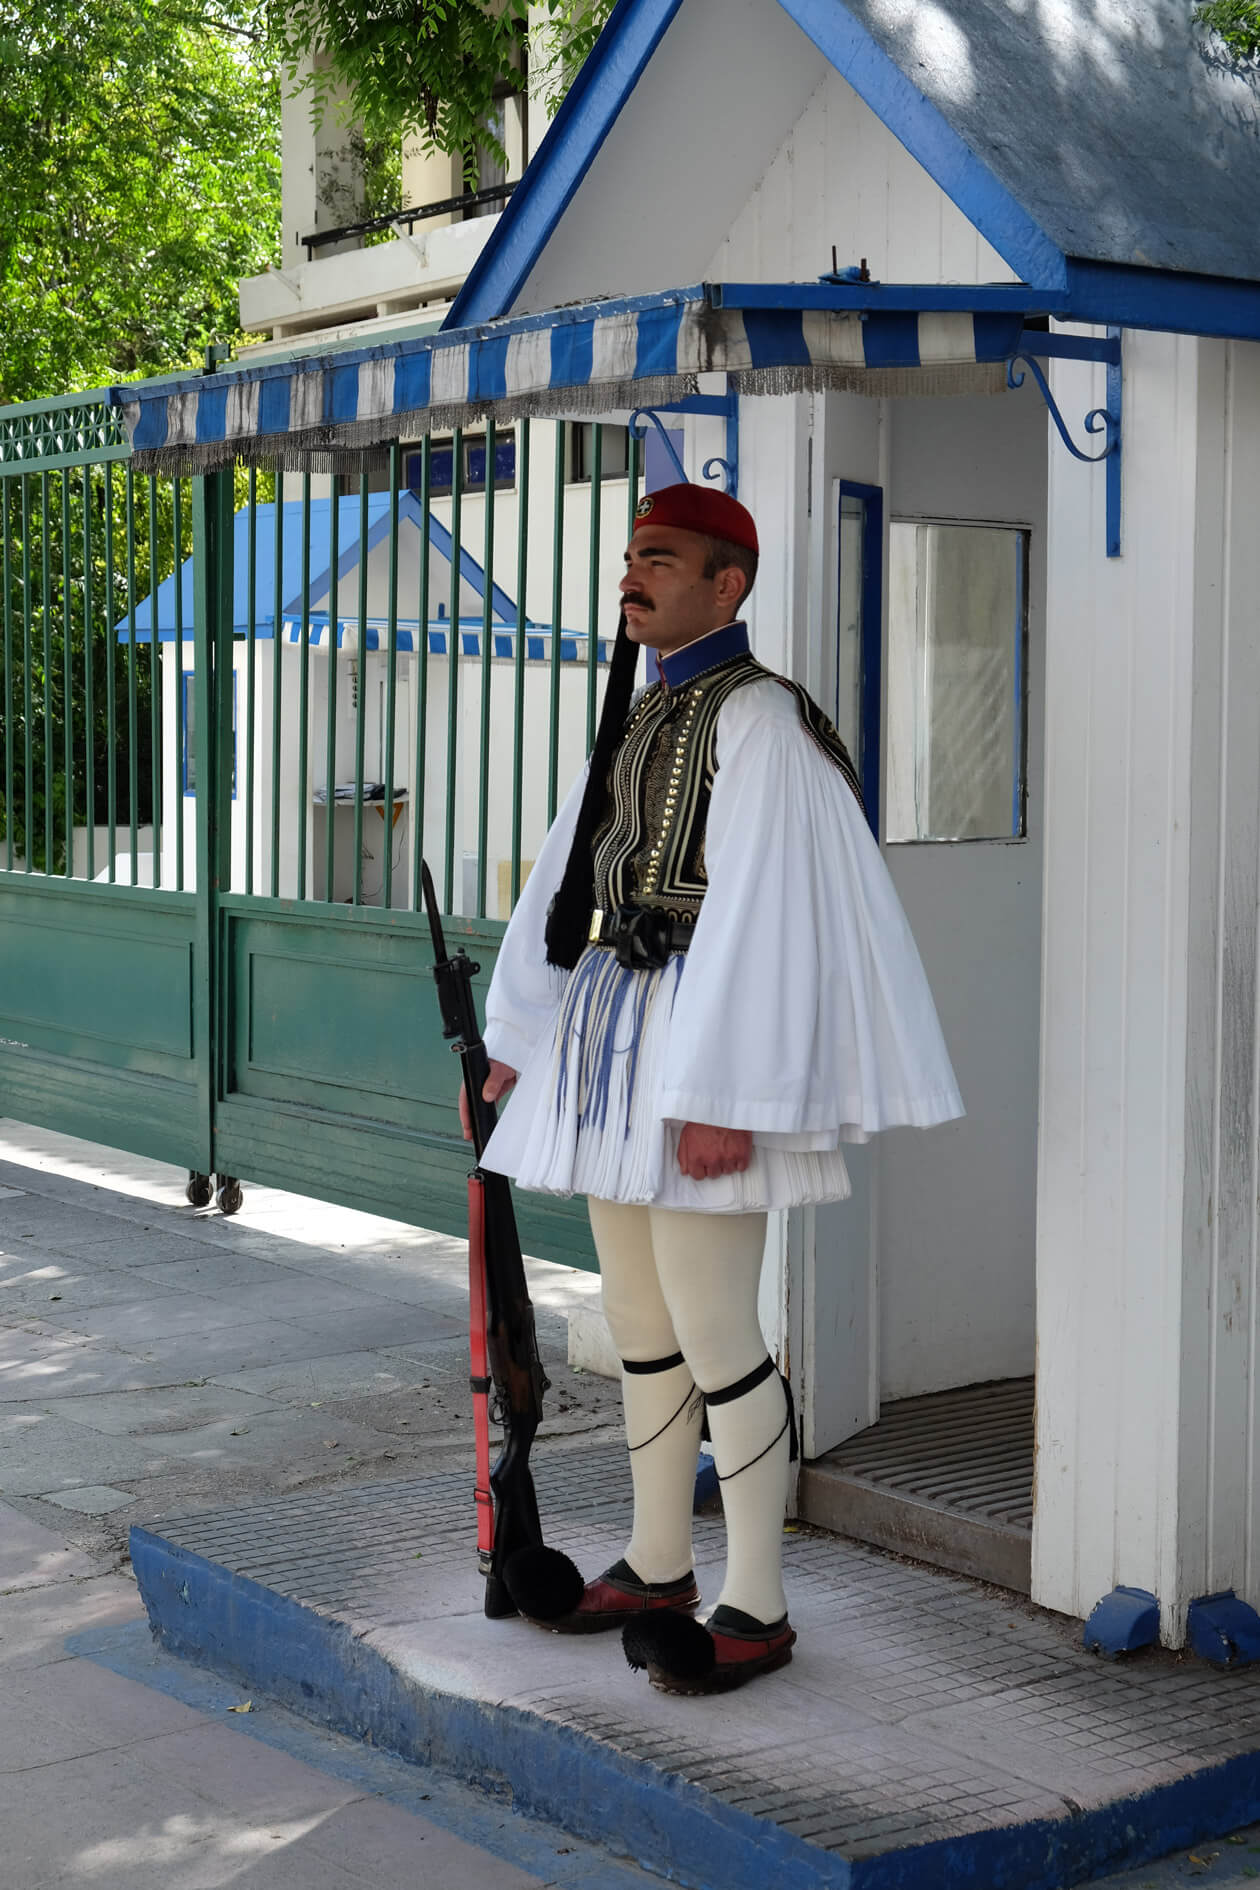 A Presidential Guard, or Evzone, at his post